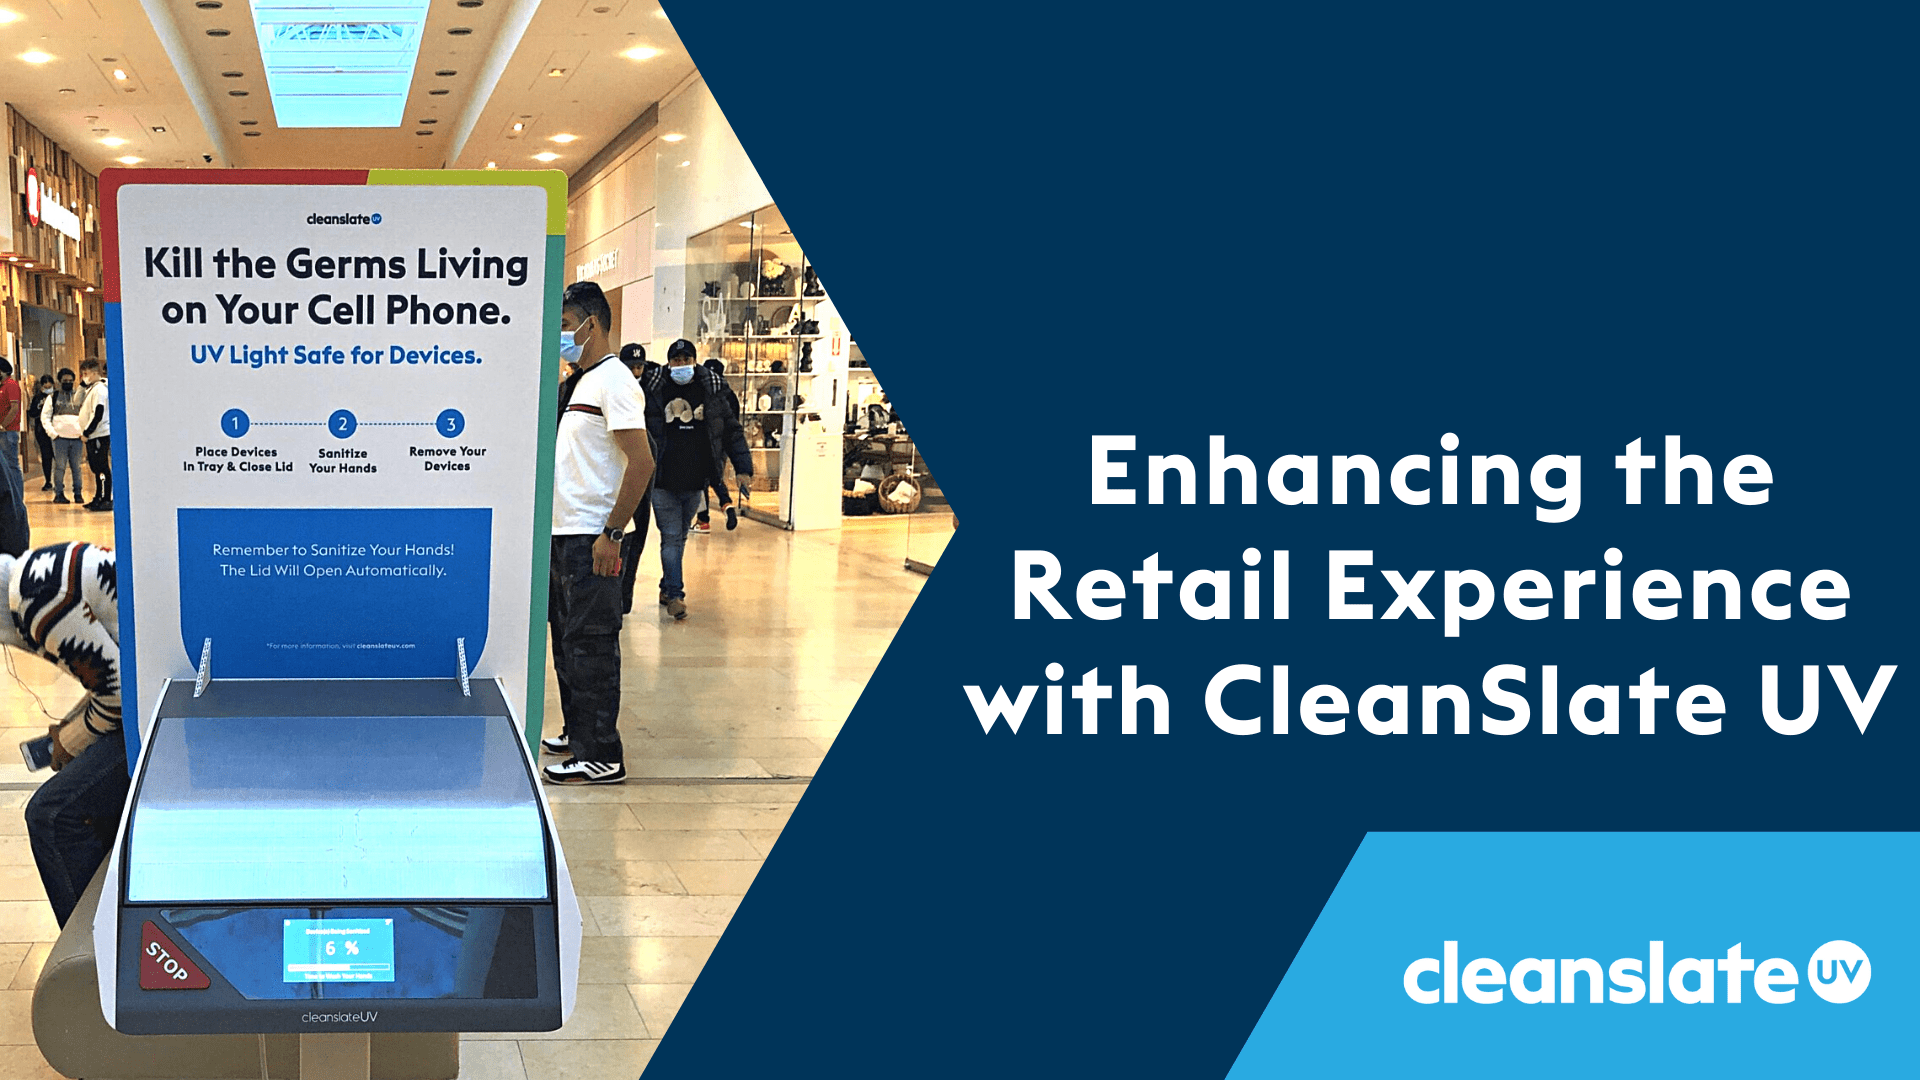 Enchanting Retail Experience Cleanslate UV Oxford Properties